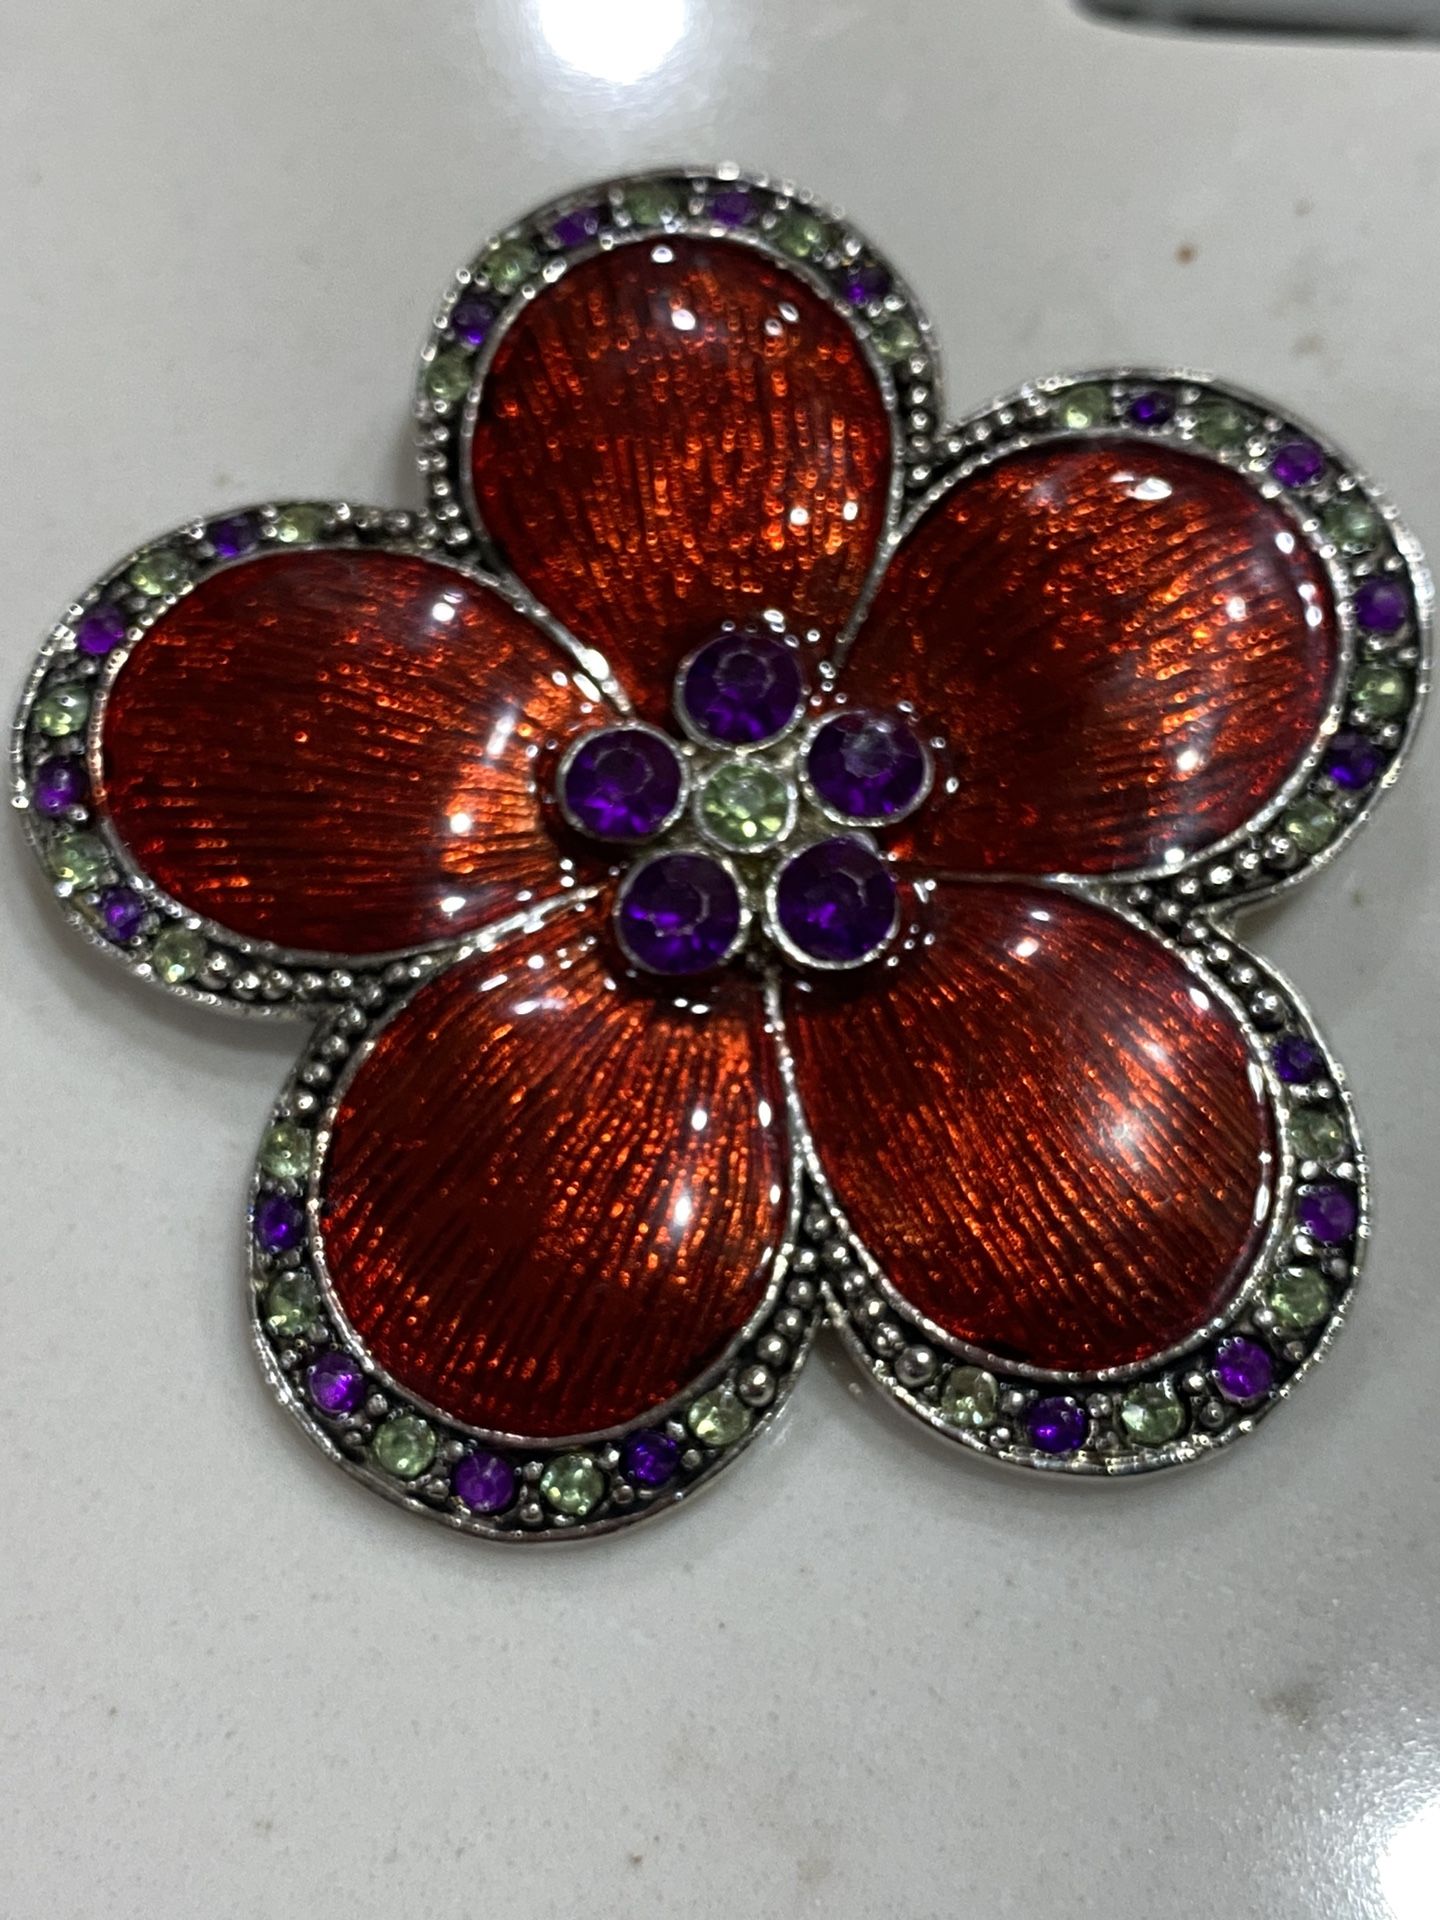 3” Large Red And Purple Rhinestones Brooch  NEW